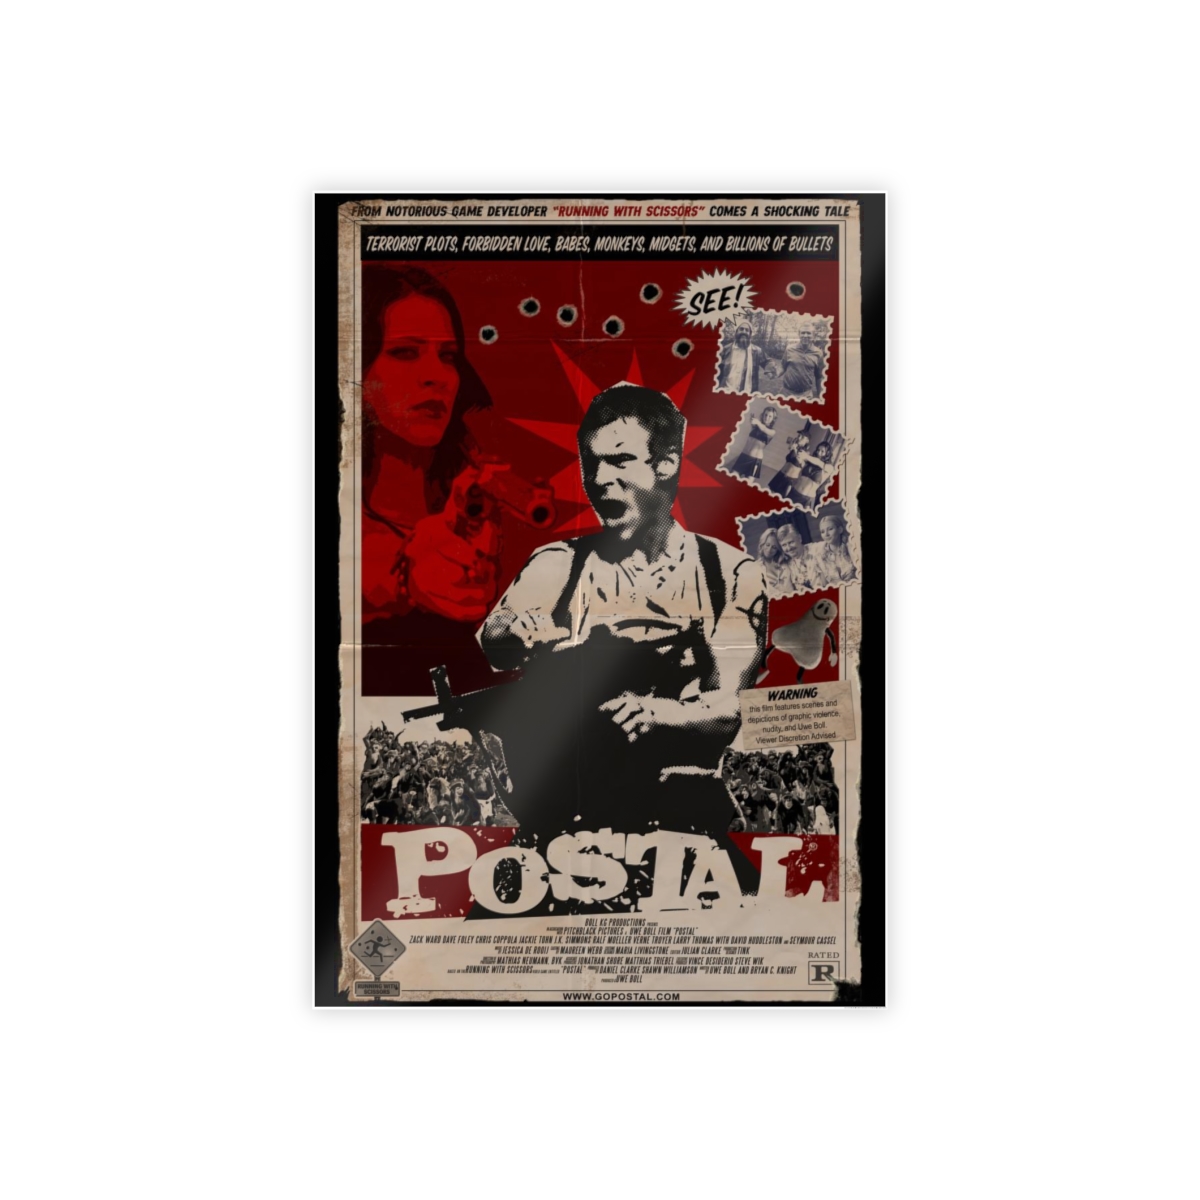 Gloss Poster - POSTAL Movie "Grindhouse" (US) product thumbnail image